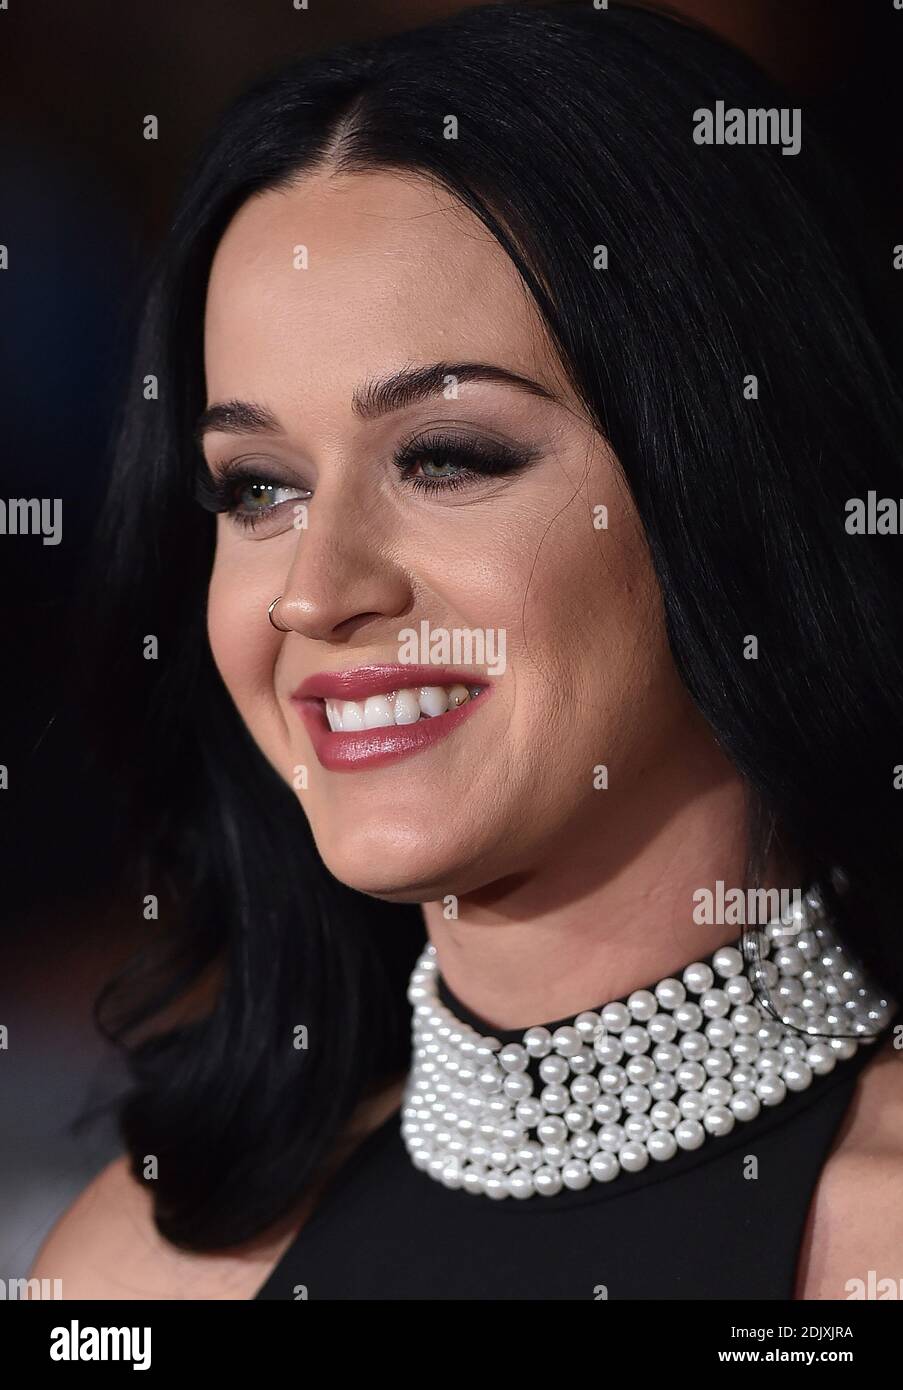 Katy Perry still wearing her Nike gold tooth jewelry attends the premiere  of Paramount Pictures' 'Office Christmas Party' at Regency Village Theatre  on December 7, 2016 in Los Angeles, California. Photo by